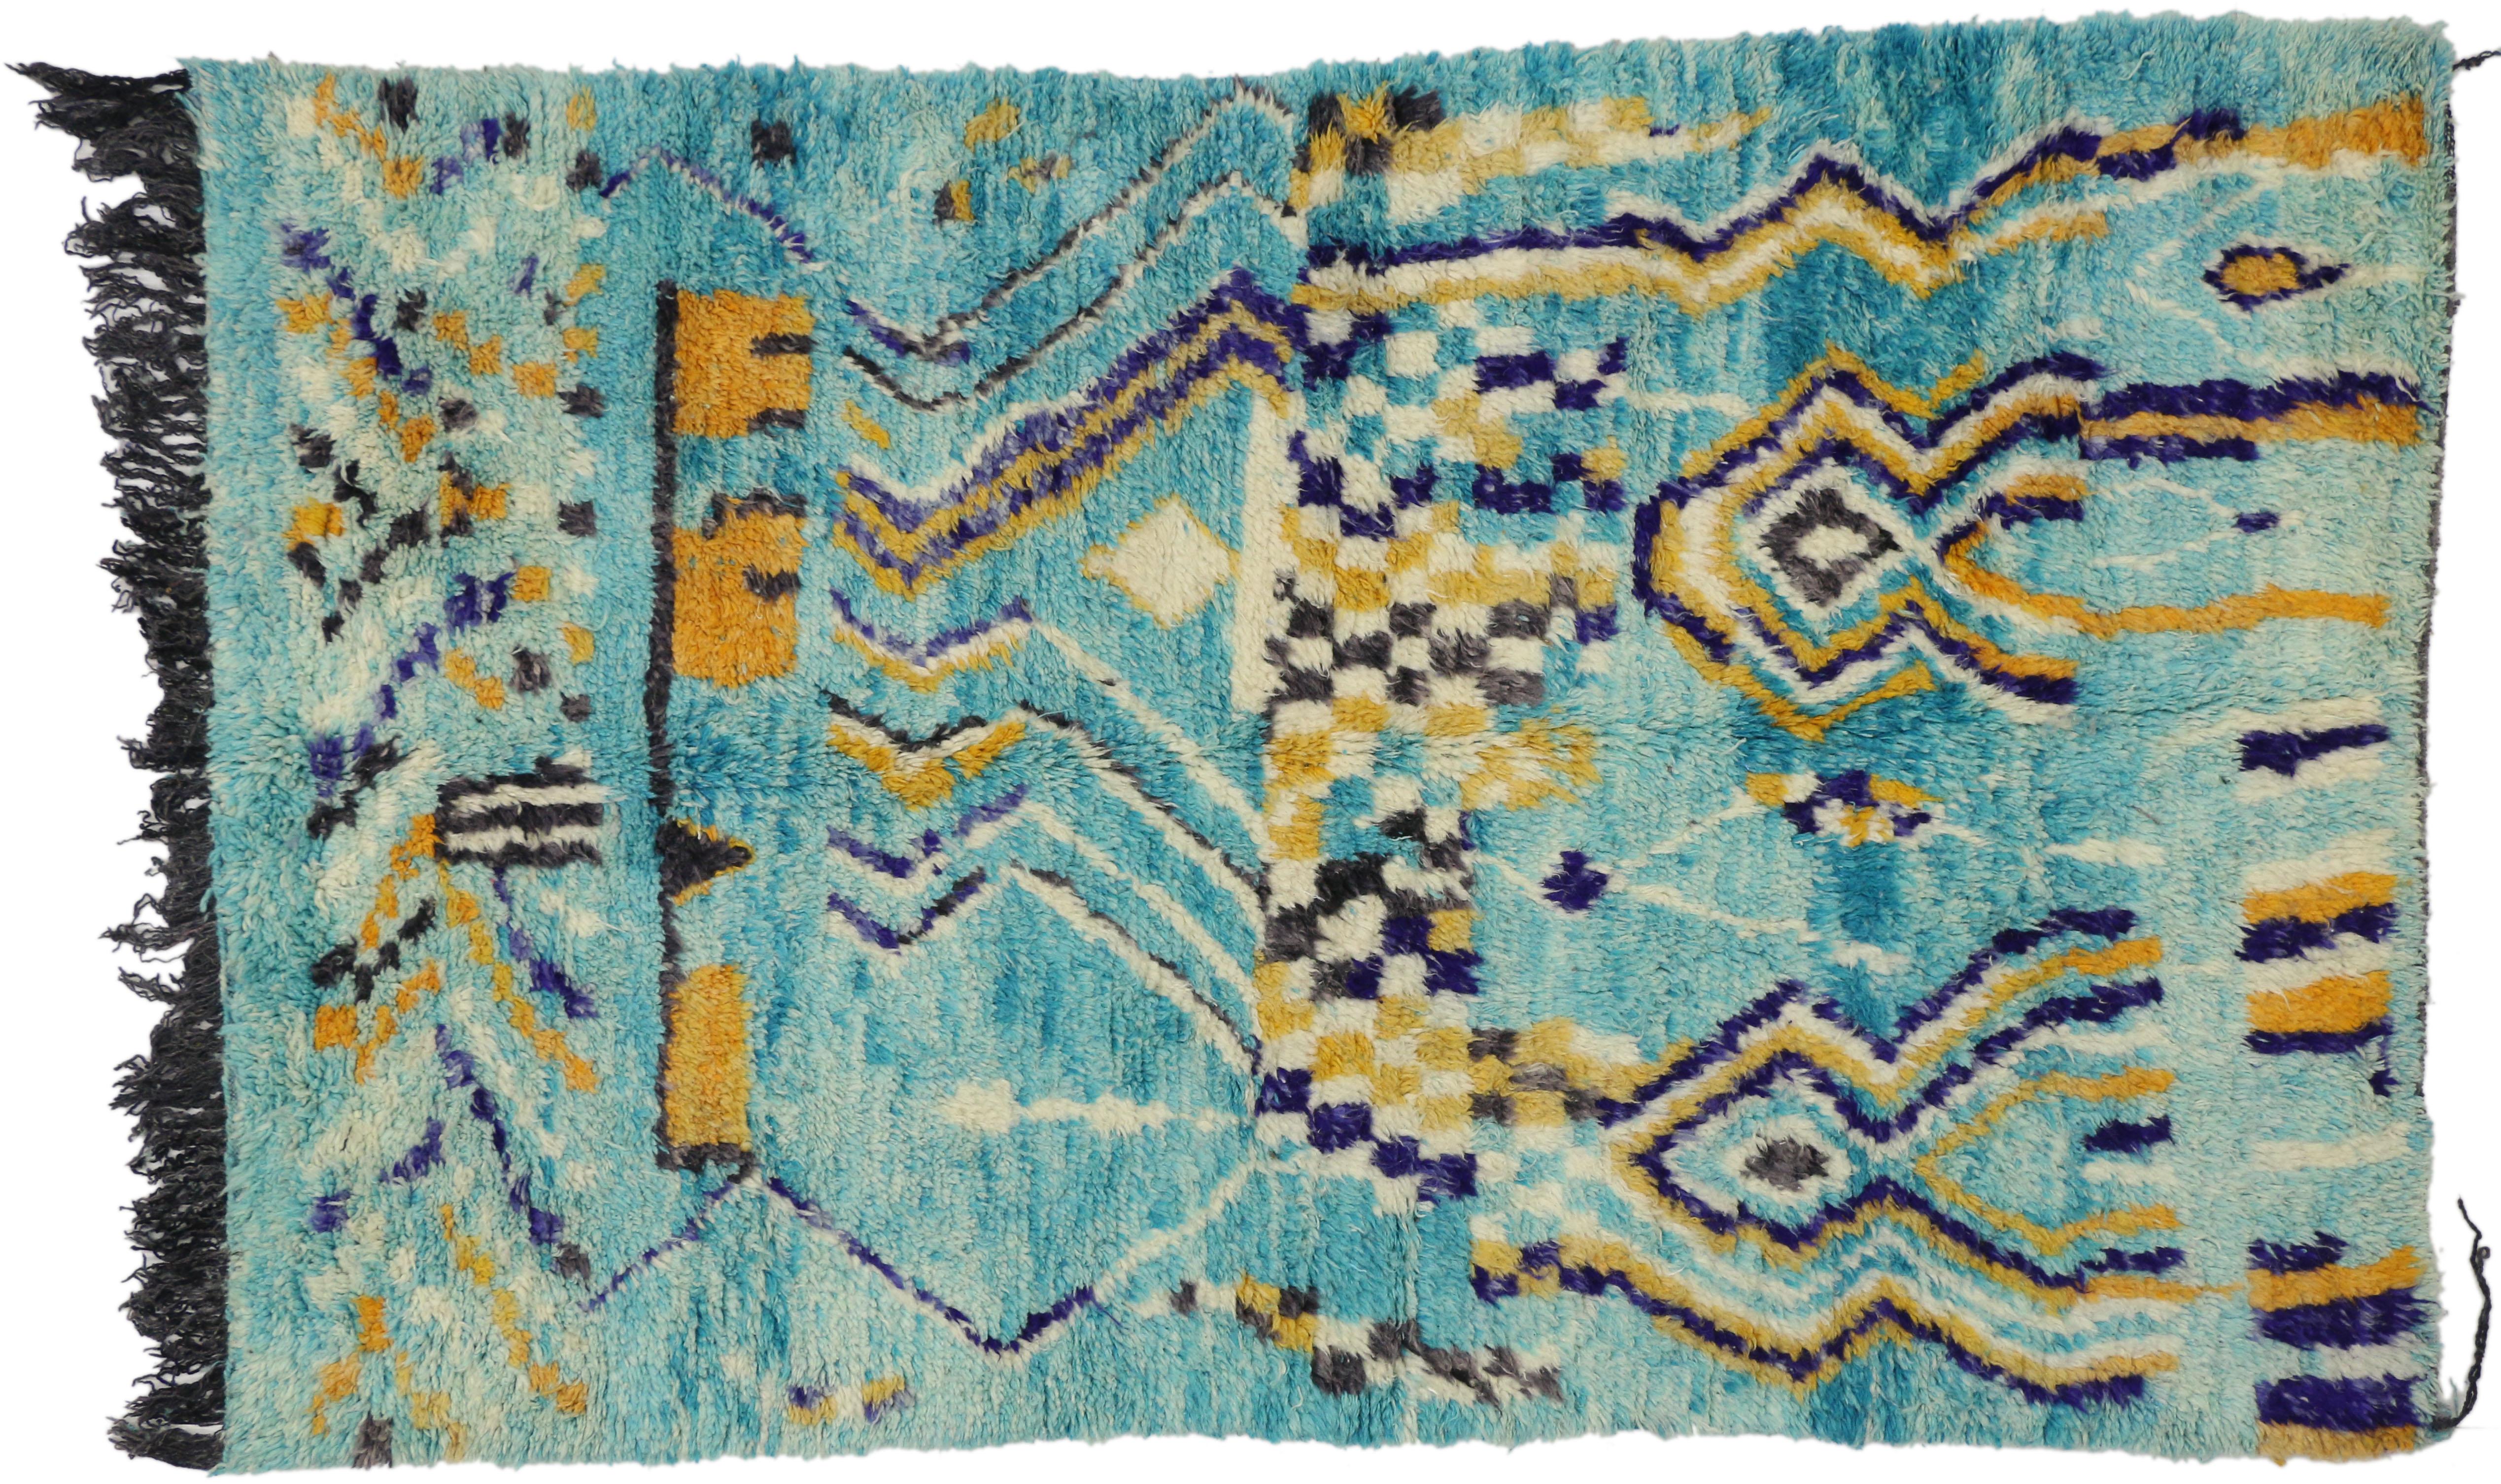 20711 Vintage Aqua Boujad Moroccan Rug, 05'00 x 08'00. Originating from Morocco's Boujad region, Boujad rugs are exquisite handwoven masterpieces that embody the vibrant artistic legacy of Berber tribes, particularly the Haouz and Rehamna. Adorned